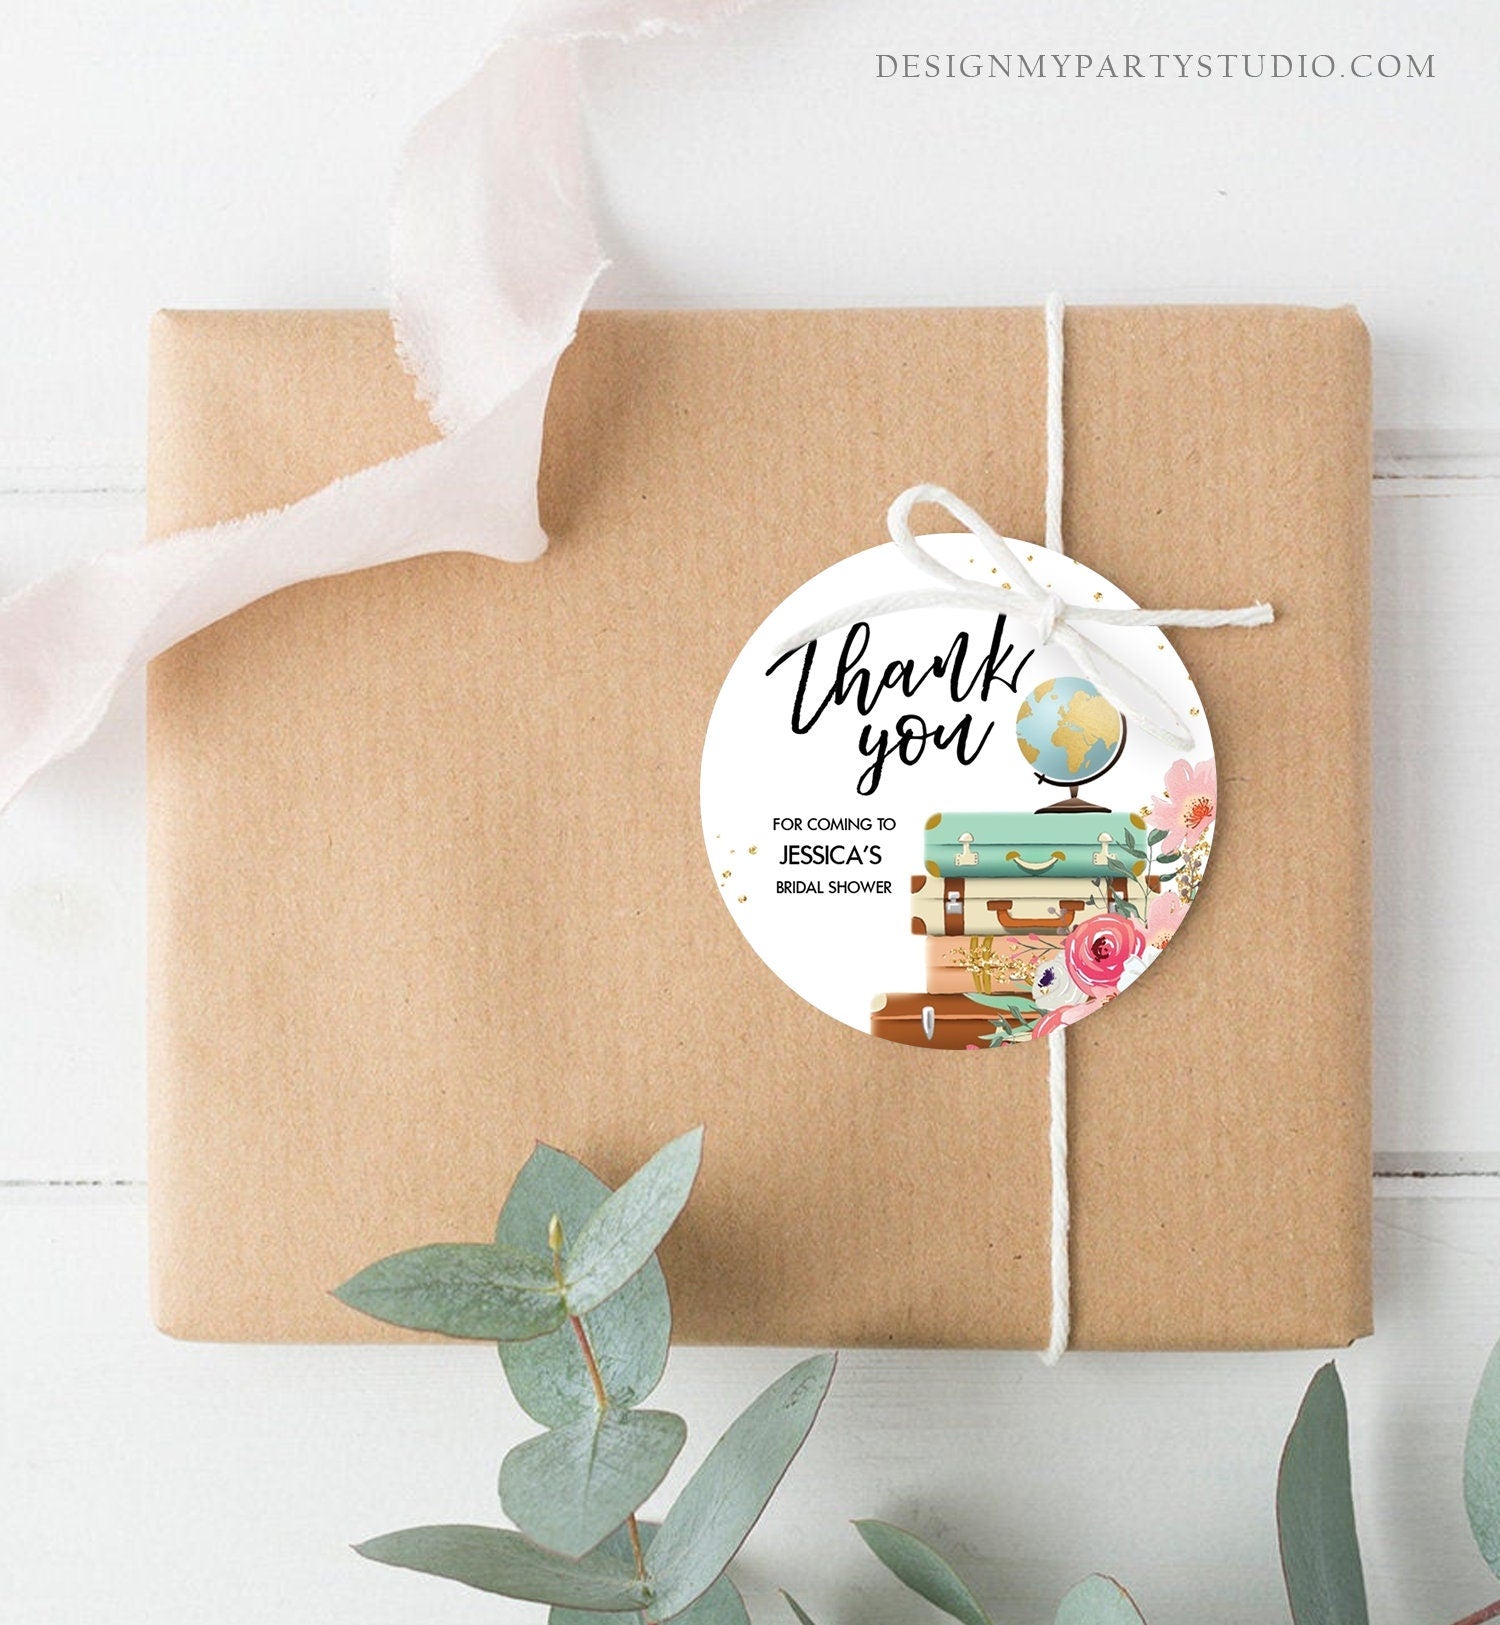 Editable Travel Thank You Tag Travel Adventure Bridal Shower Favor Label Round Stickers Pink Floral Download Corjl Template PRINTABLE 0030